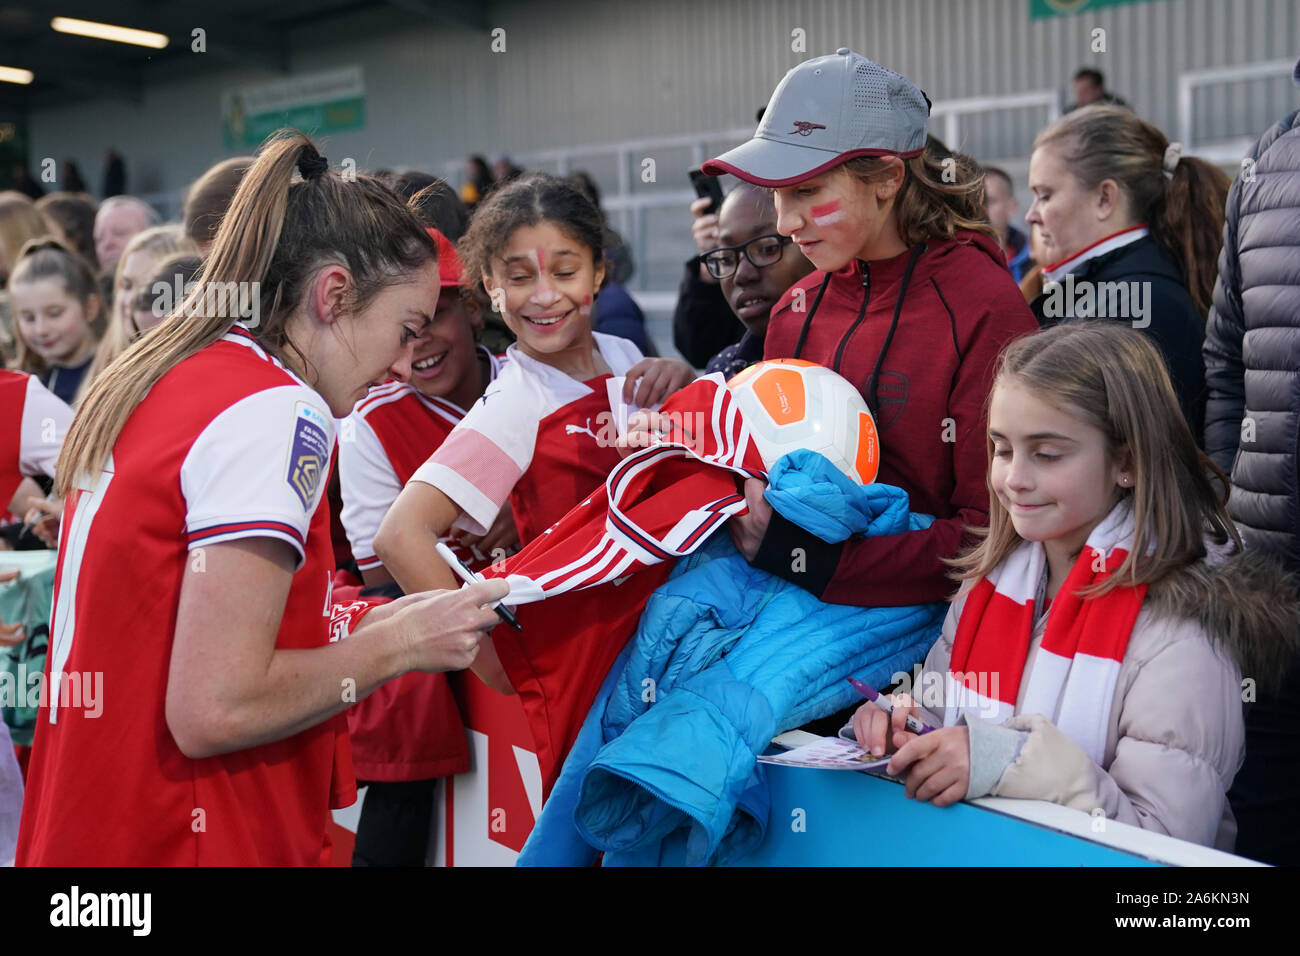 Borehamwood, UK. 27th Oct, 2019. Lisa Evans of Arsenal signing for their fans during the Barclay's FA WSL football match between Arsenal vs Manchester City at Meadow Park on October 27, 2019 in Borehamwood, England (Photo by Daniela Porcelli/SPP) Credit: SPP Sport Press Photo. /Alamy Live News Stock Photo